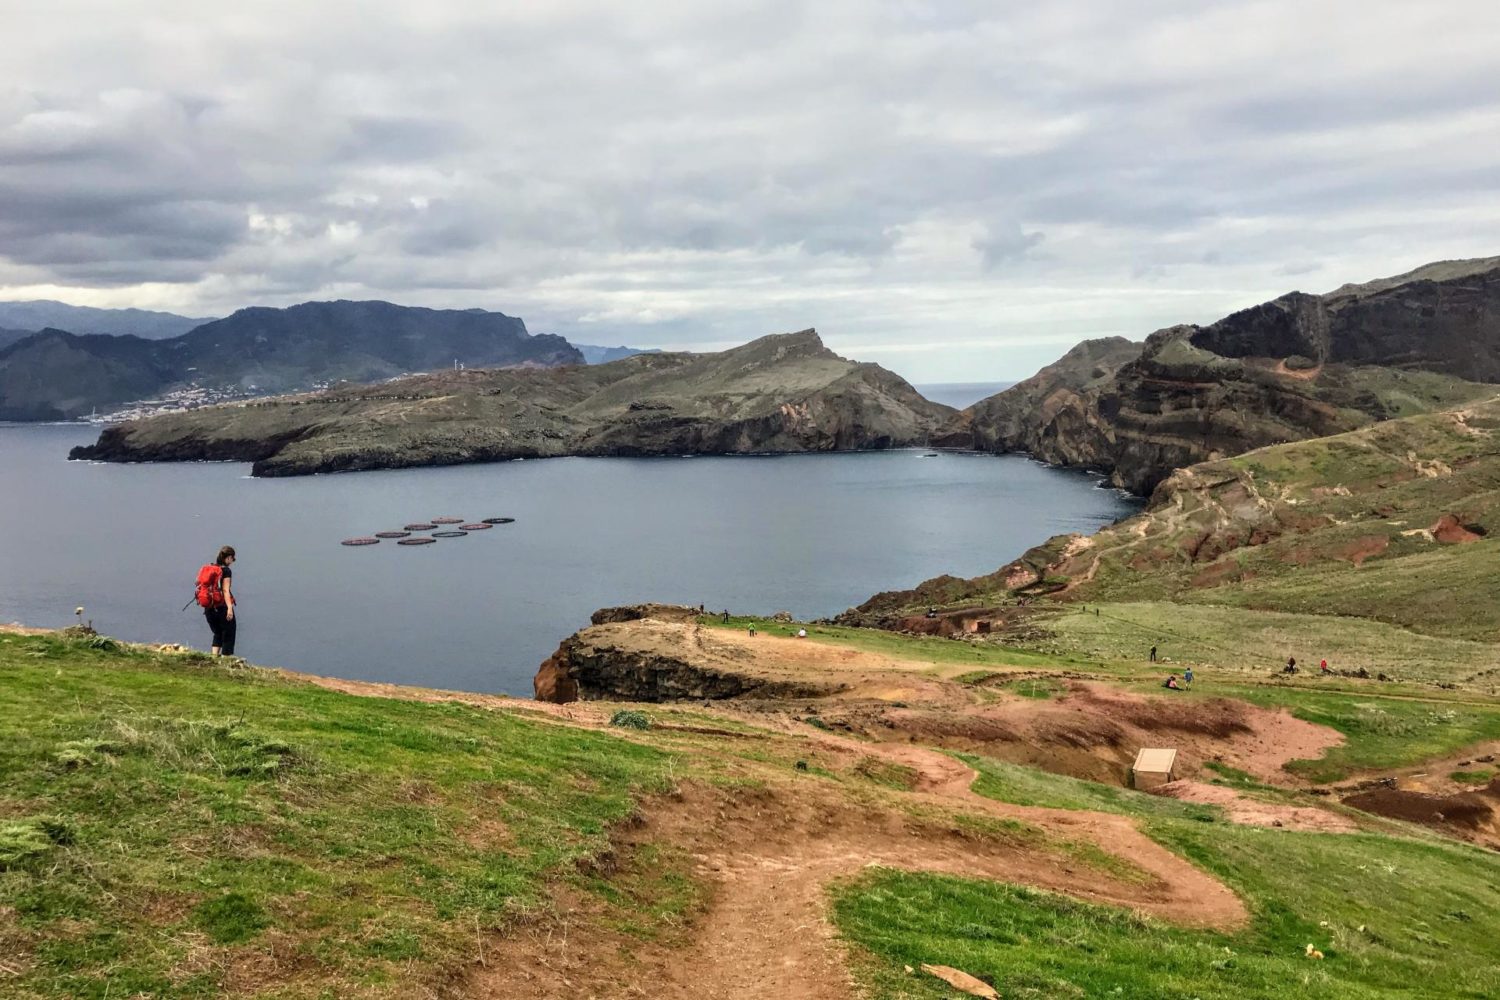 Self-guided hiking tour of Portugal's Madeira Island